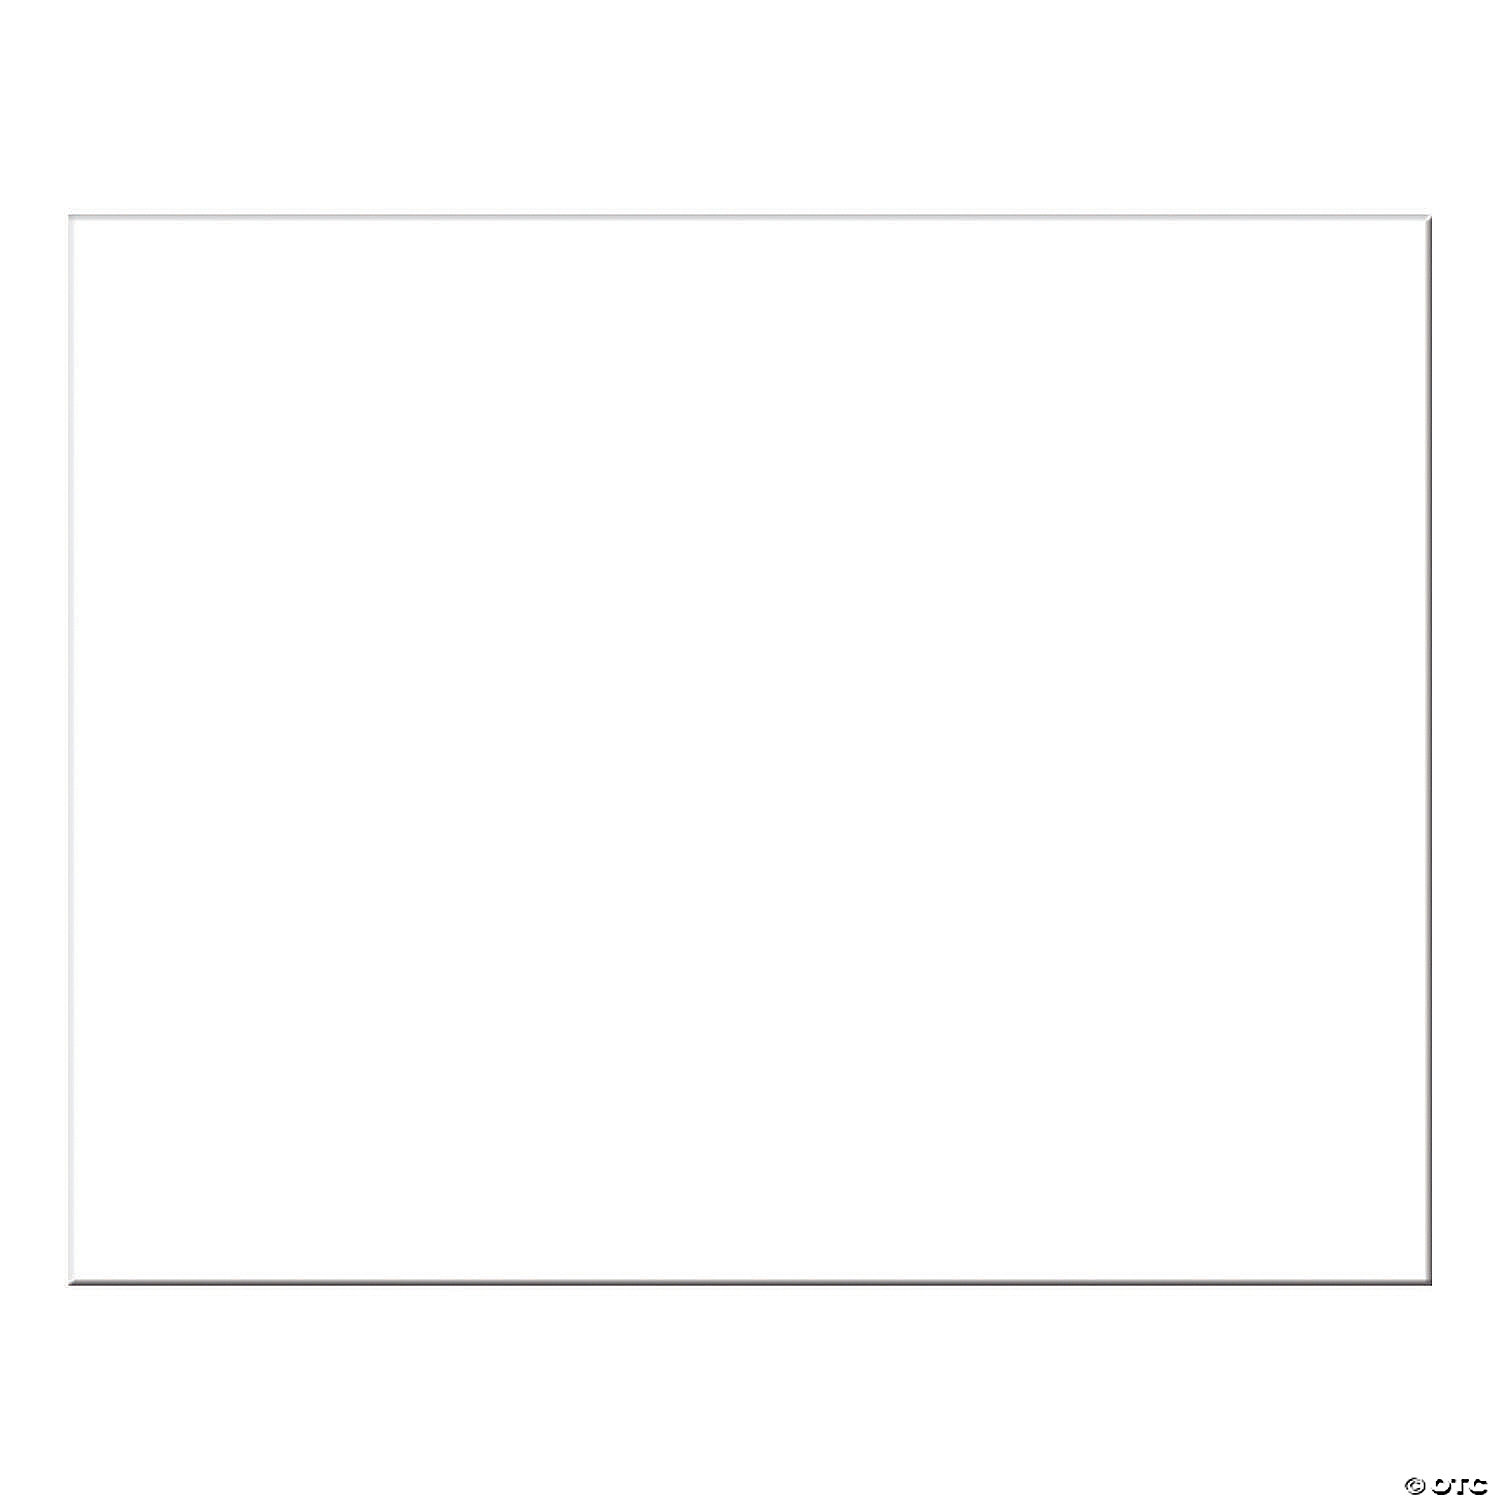 Pacon Four-Ply Poster Board, White - 22 x 28 - Pack of 25